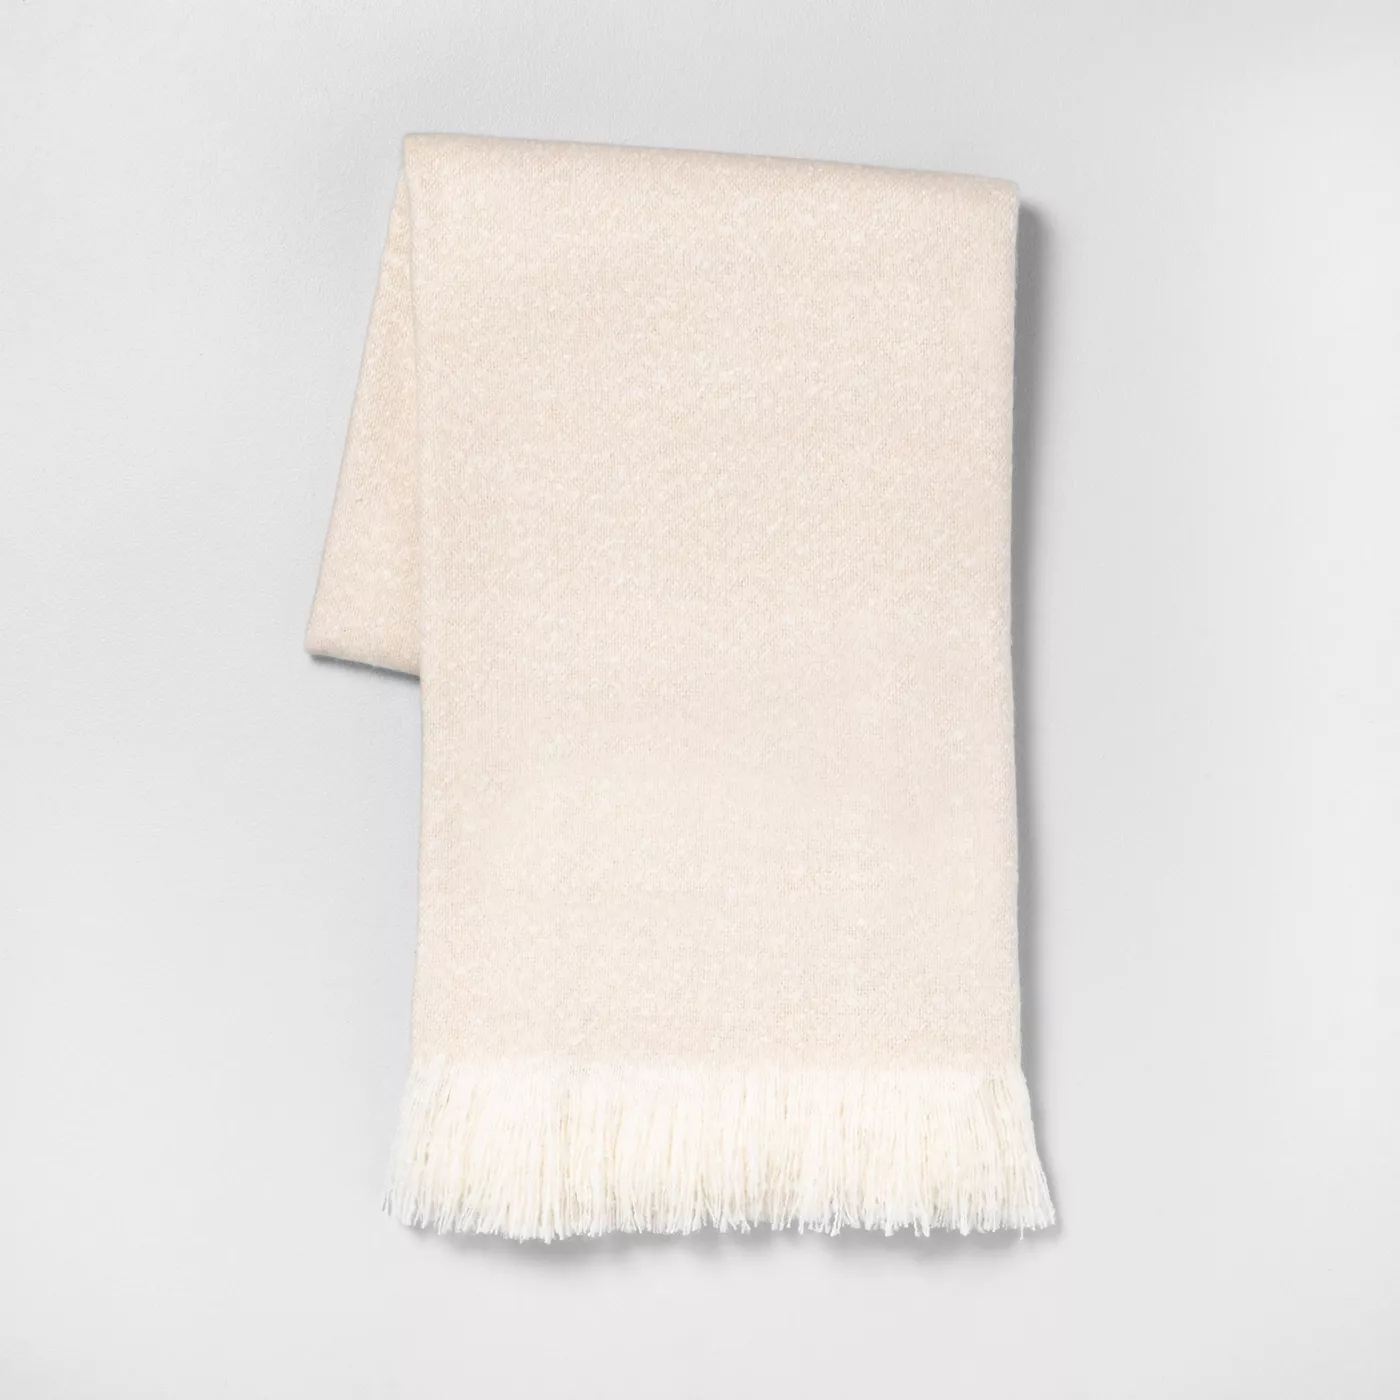 Shop 55" x 70" Throw Blanket Cream - Hearth & Hand with Magnolia from Target on Openhaus